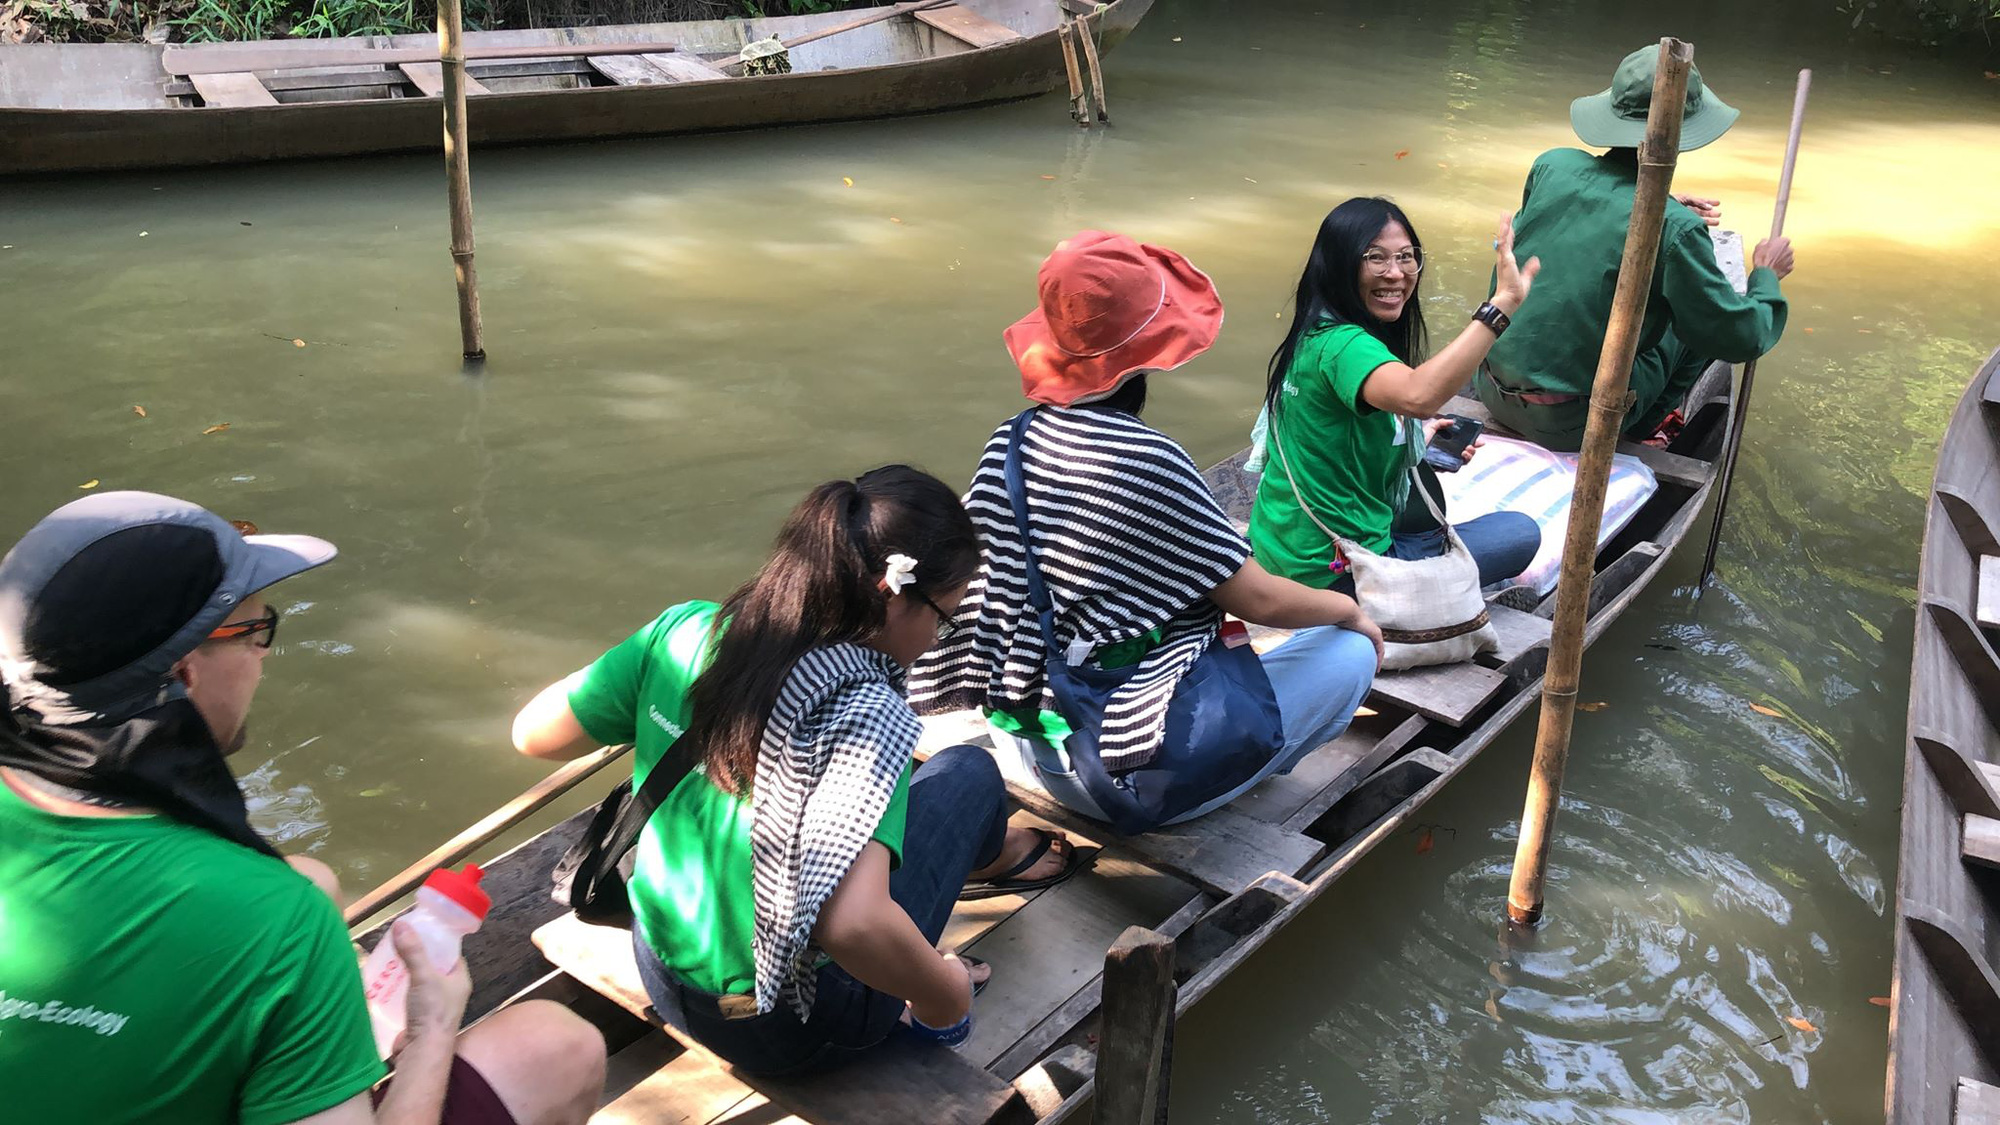 Visitors experience canoeing on 'xuong ba la' (a type of row boat) at the Xeo Quyt Tourism Area in Dong Thap Province, Vietnam. Photo: Ly Quoc Dang / Tuoi Tre